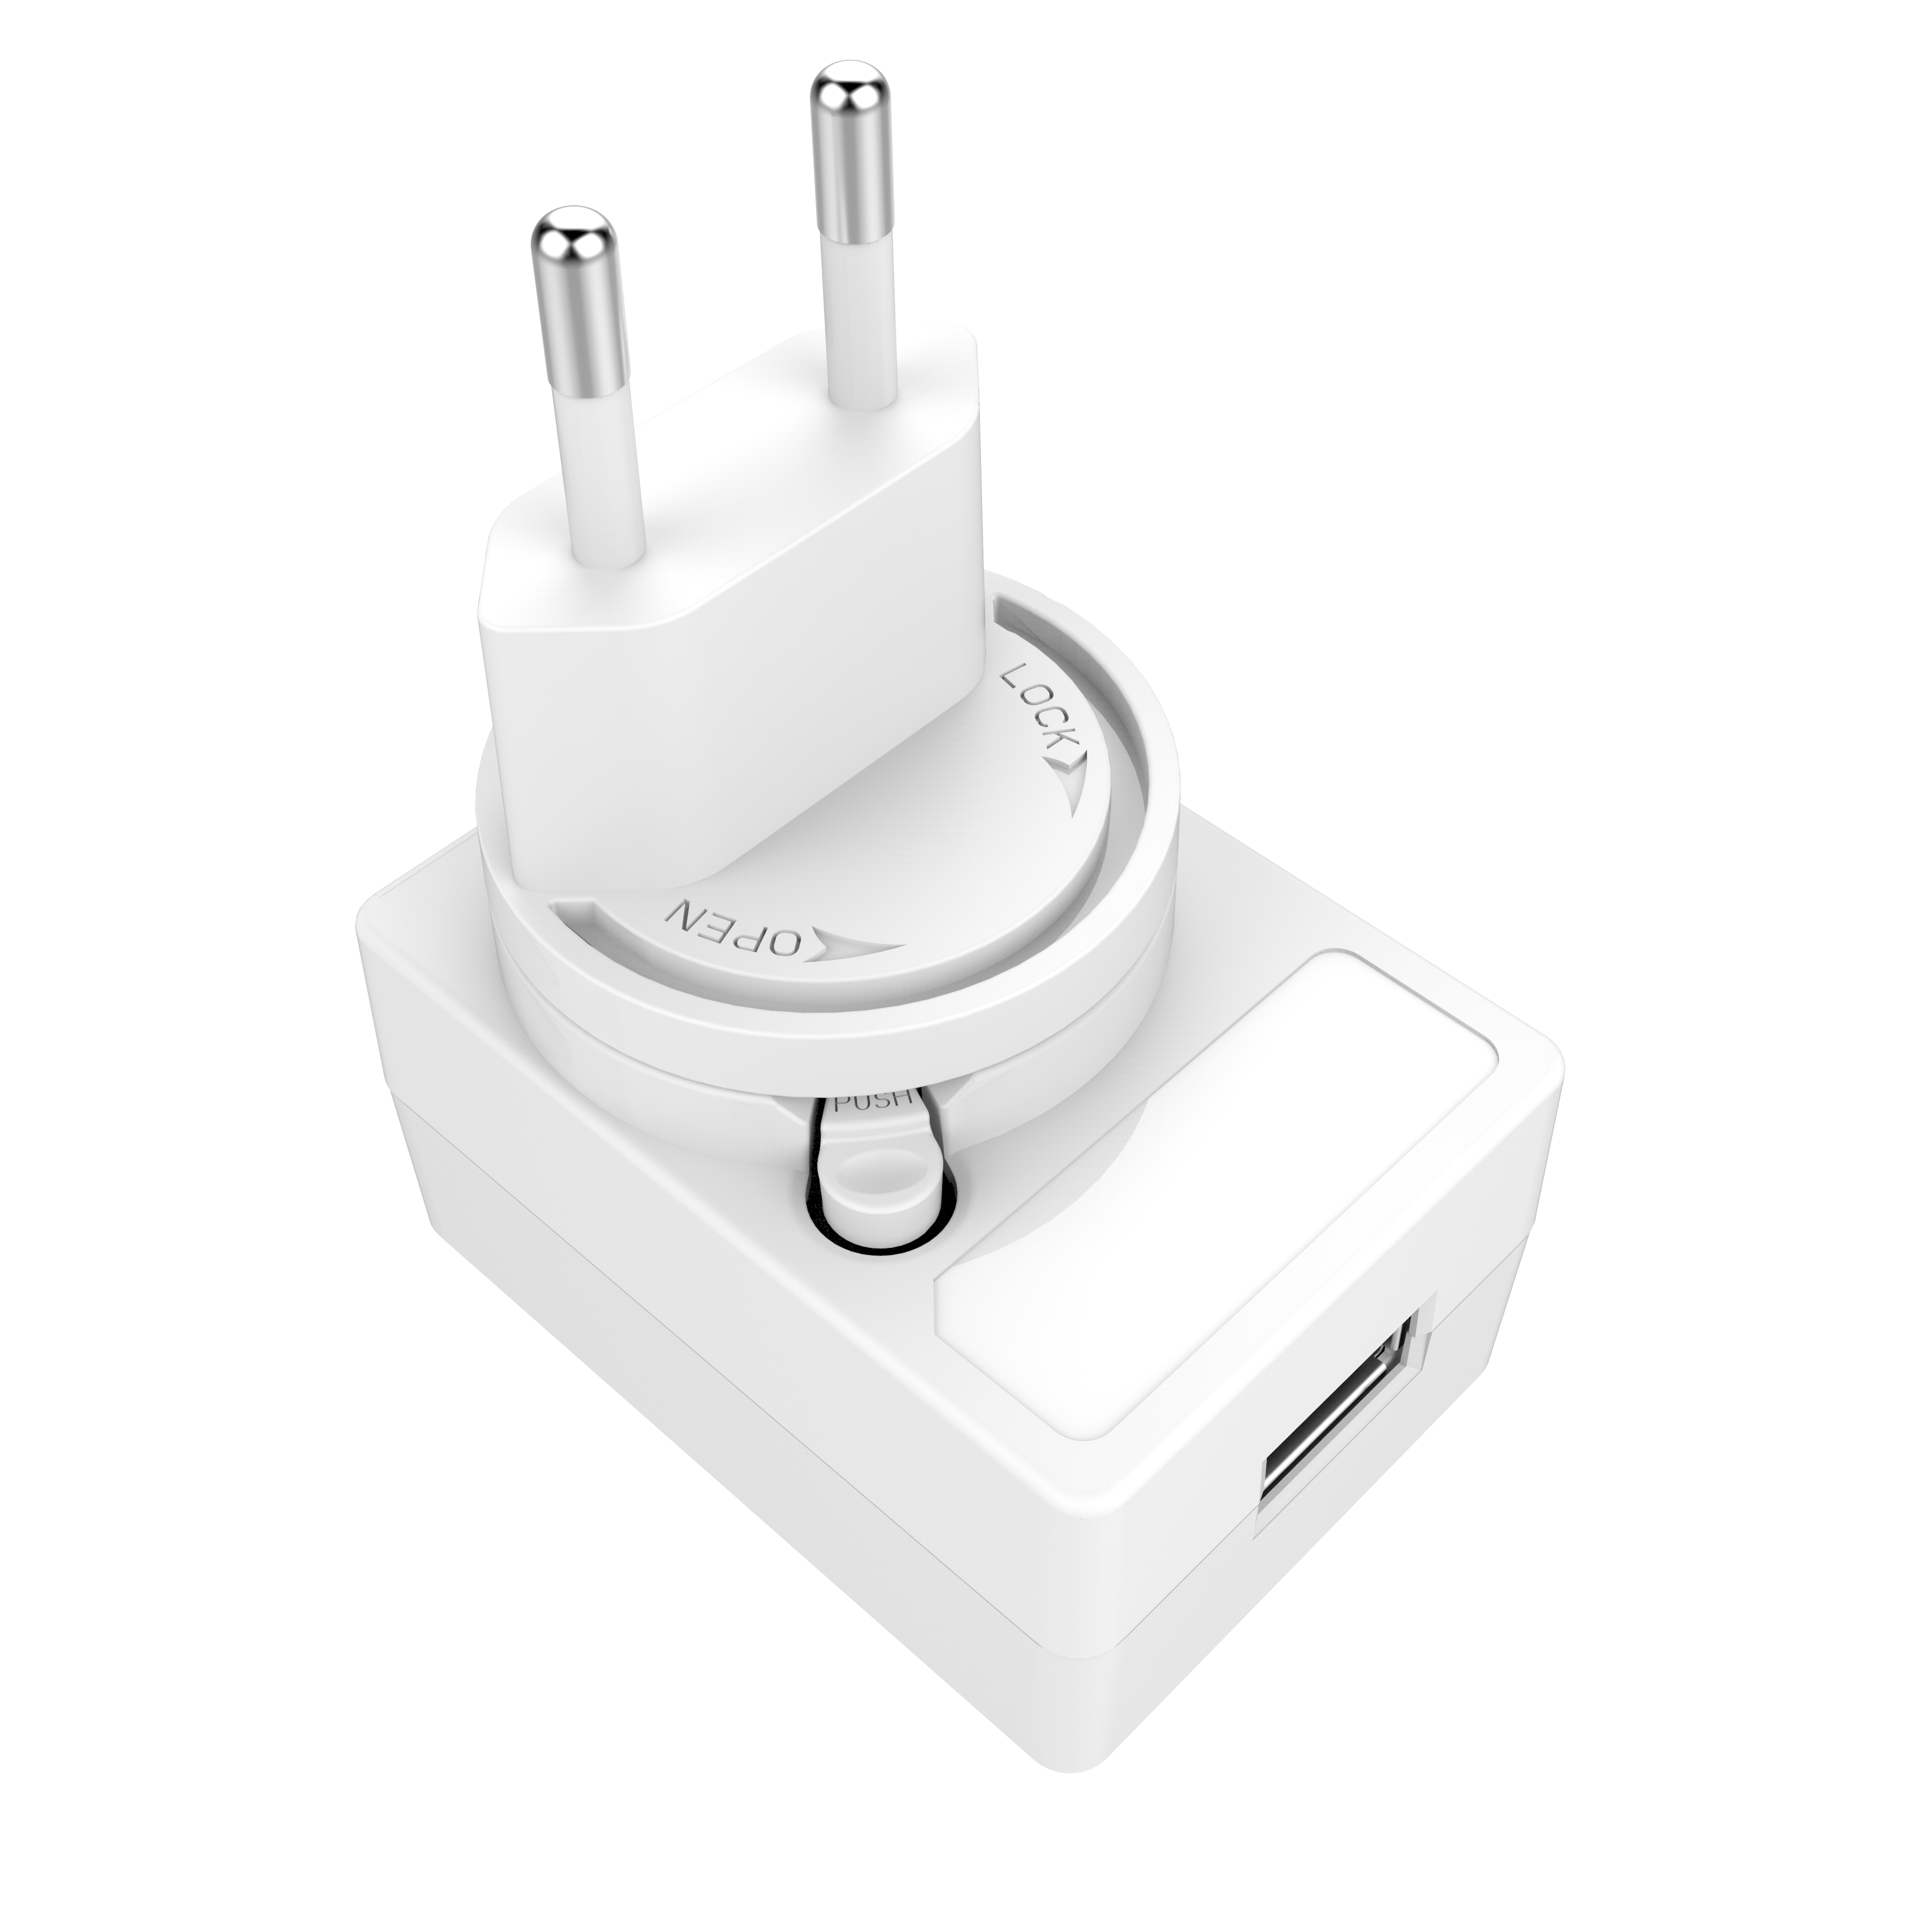 Wall mount 5V 2A 5V 3A 5V1A switching USB Power Adapter with interchangeable AU EU UK US plugs